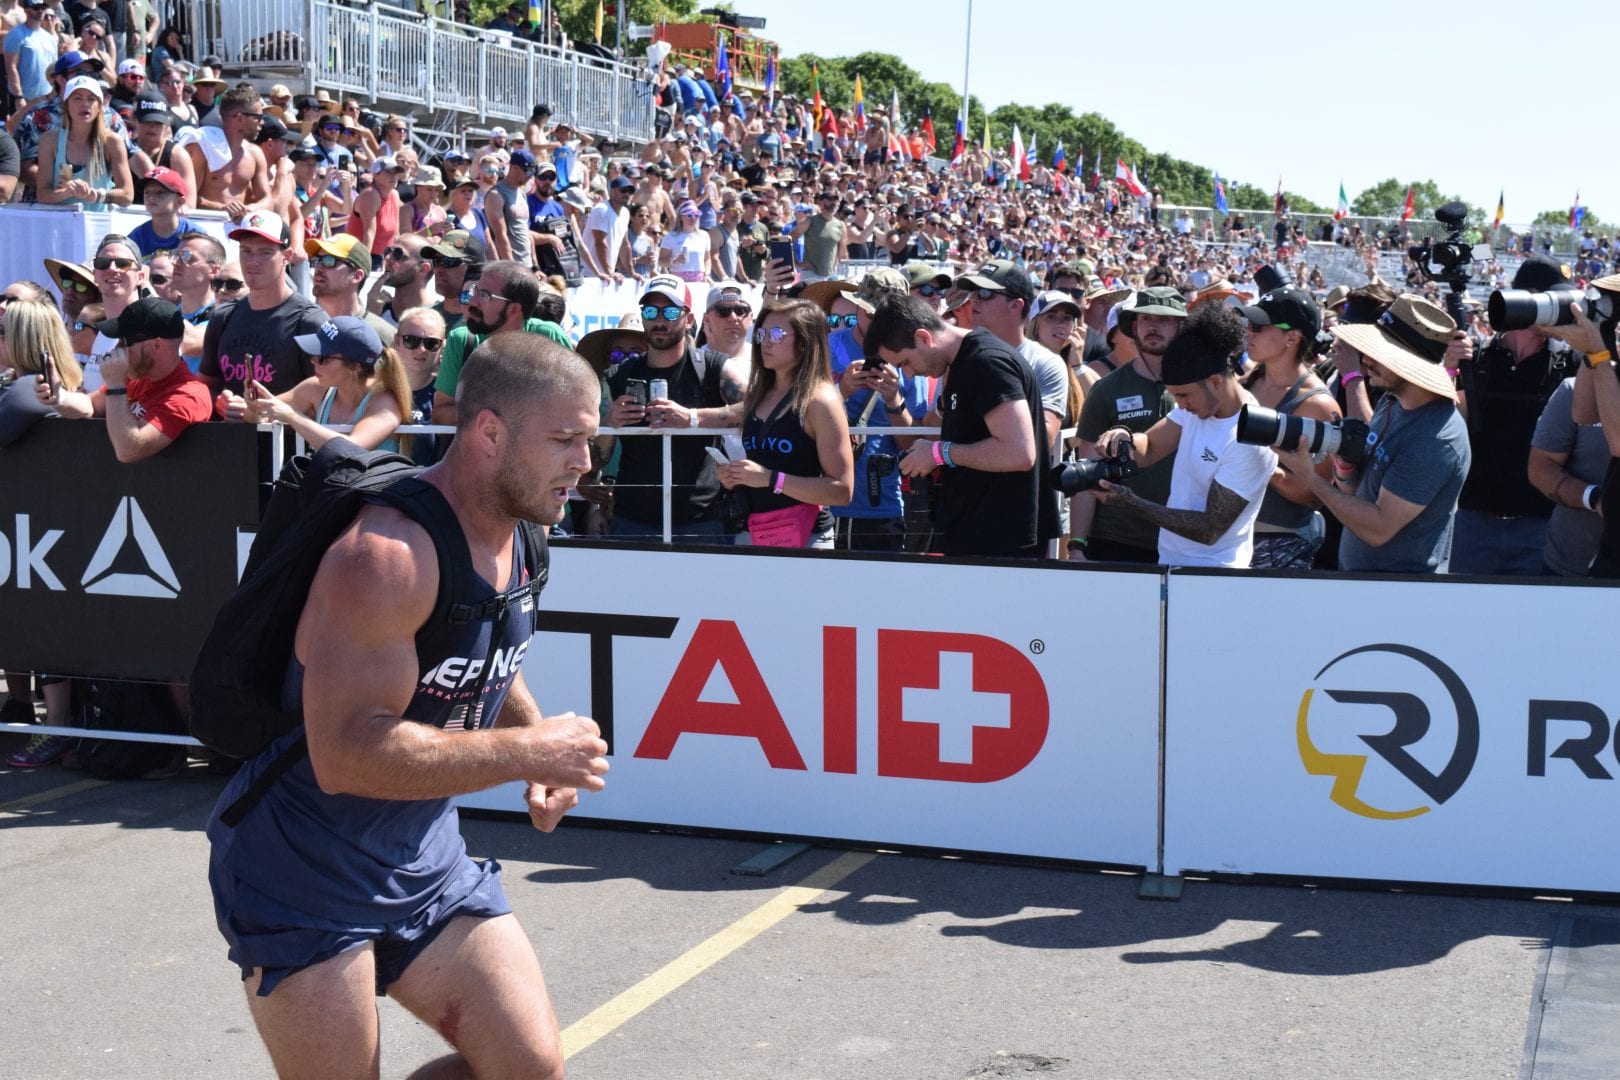 Jacob Heppner completes the Ruck Run event at the 2019 CrossFit Games.